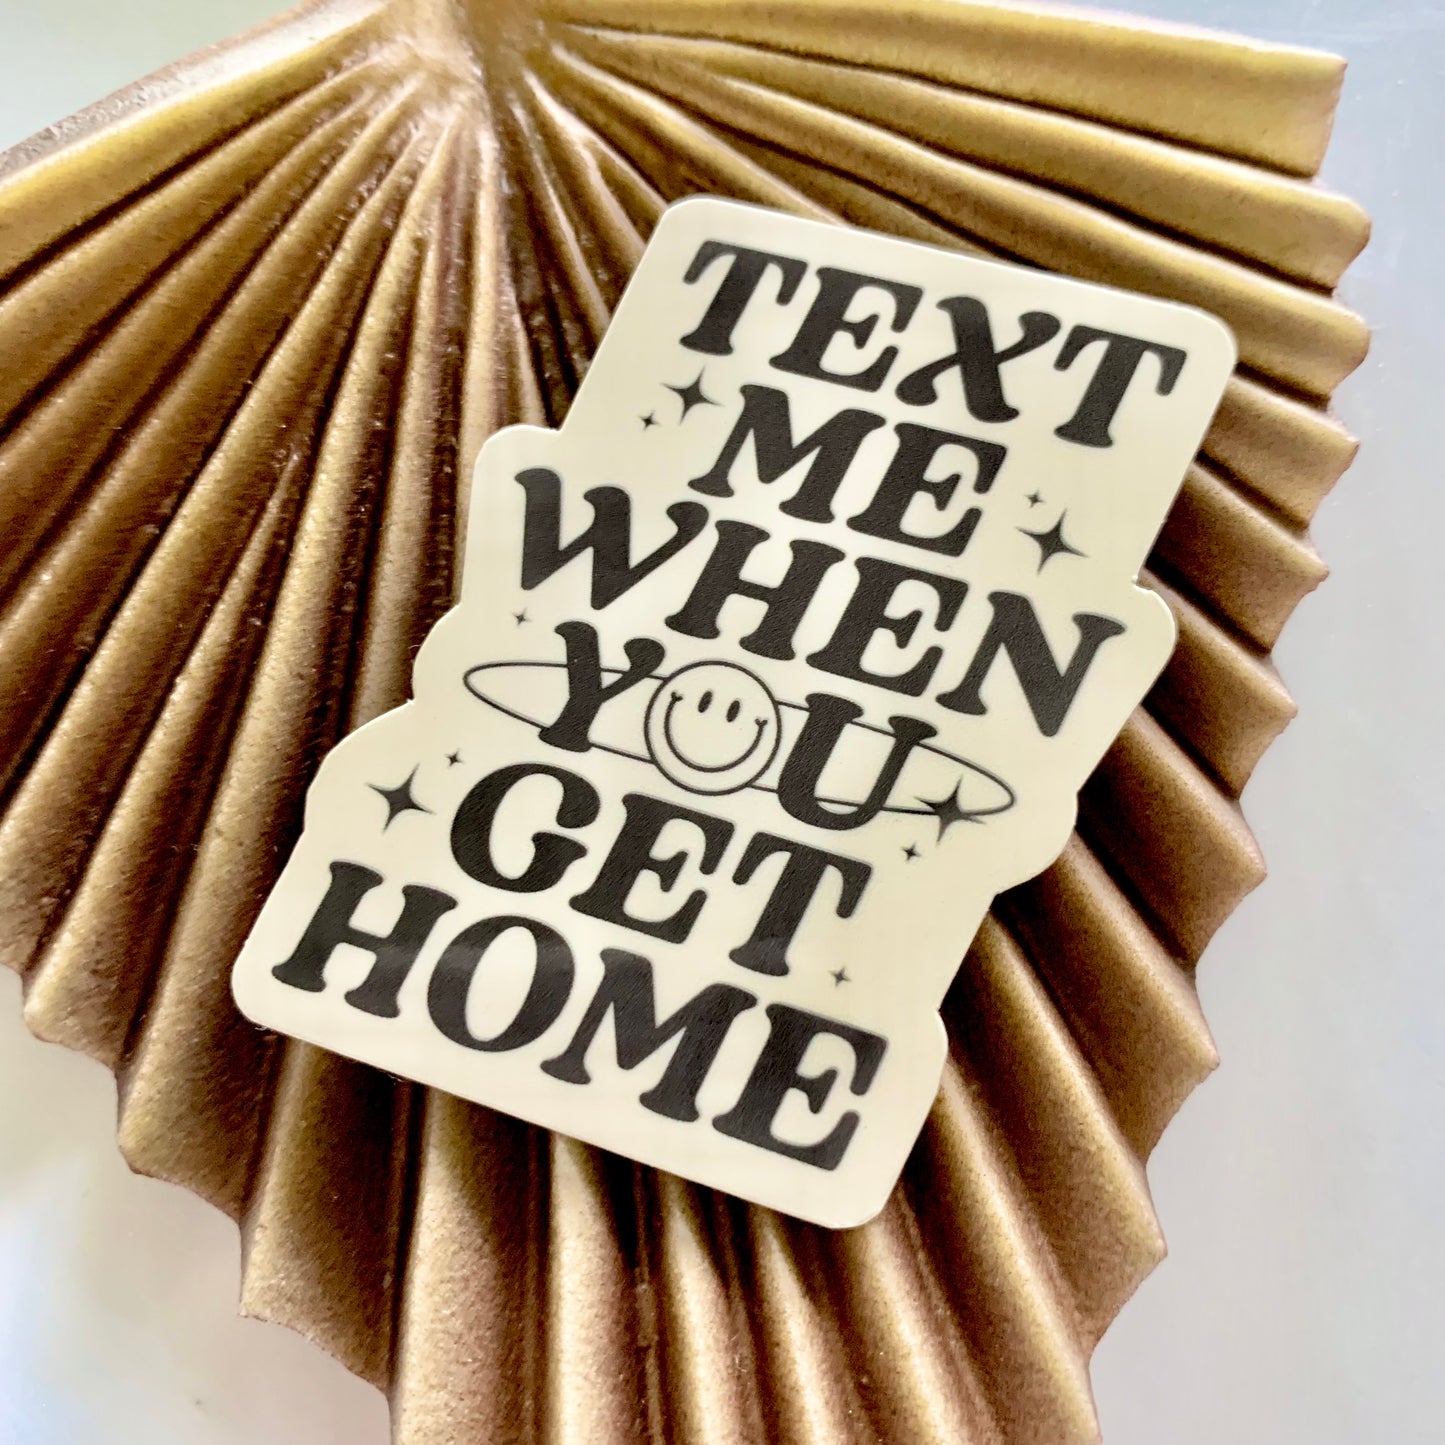 Beige Text Me When You Get Home 8x8" Art Print